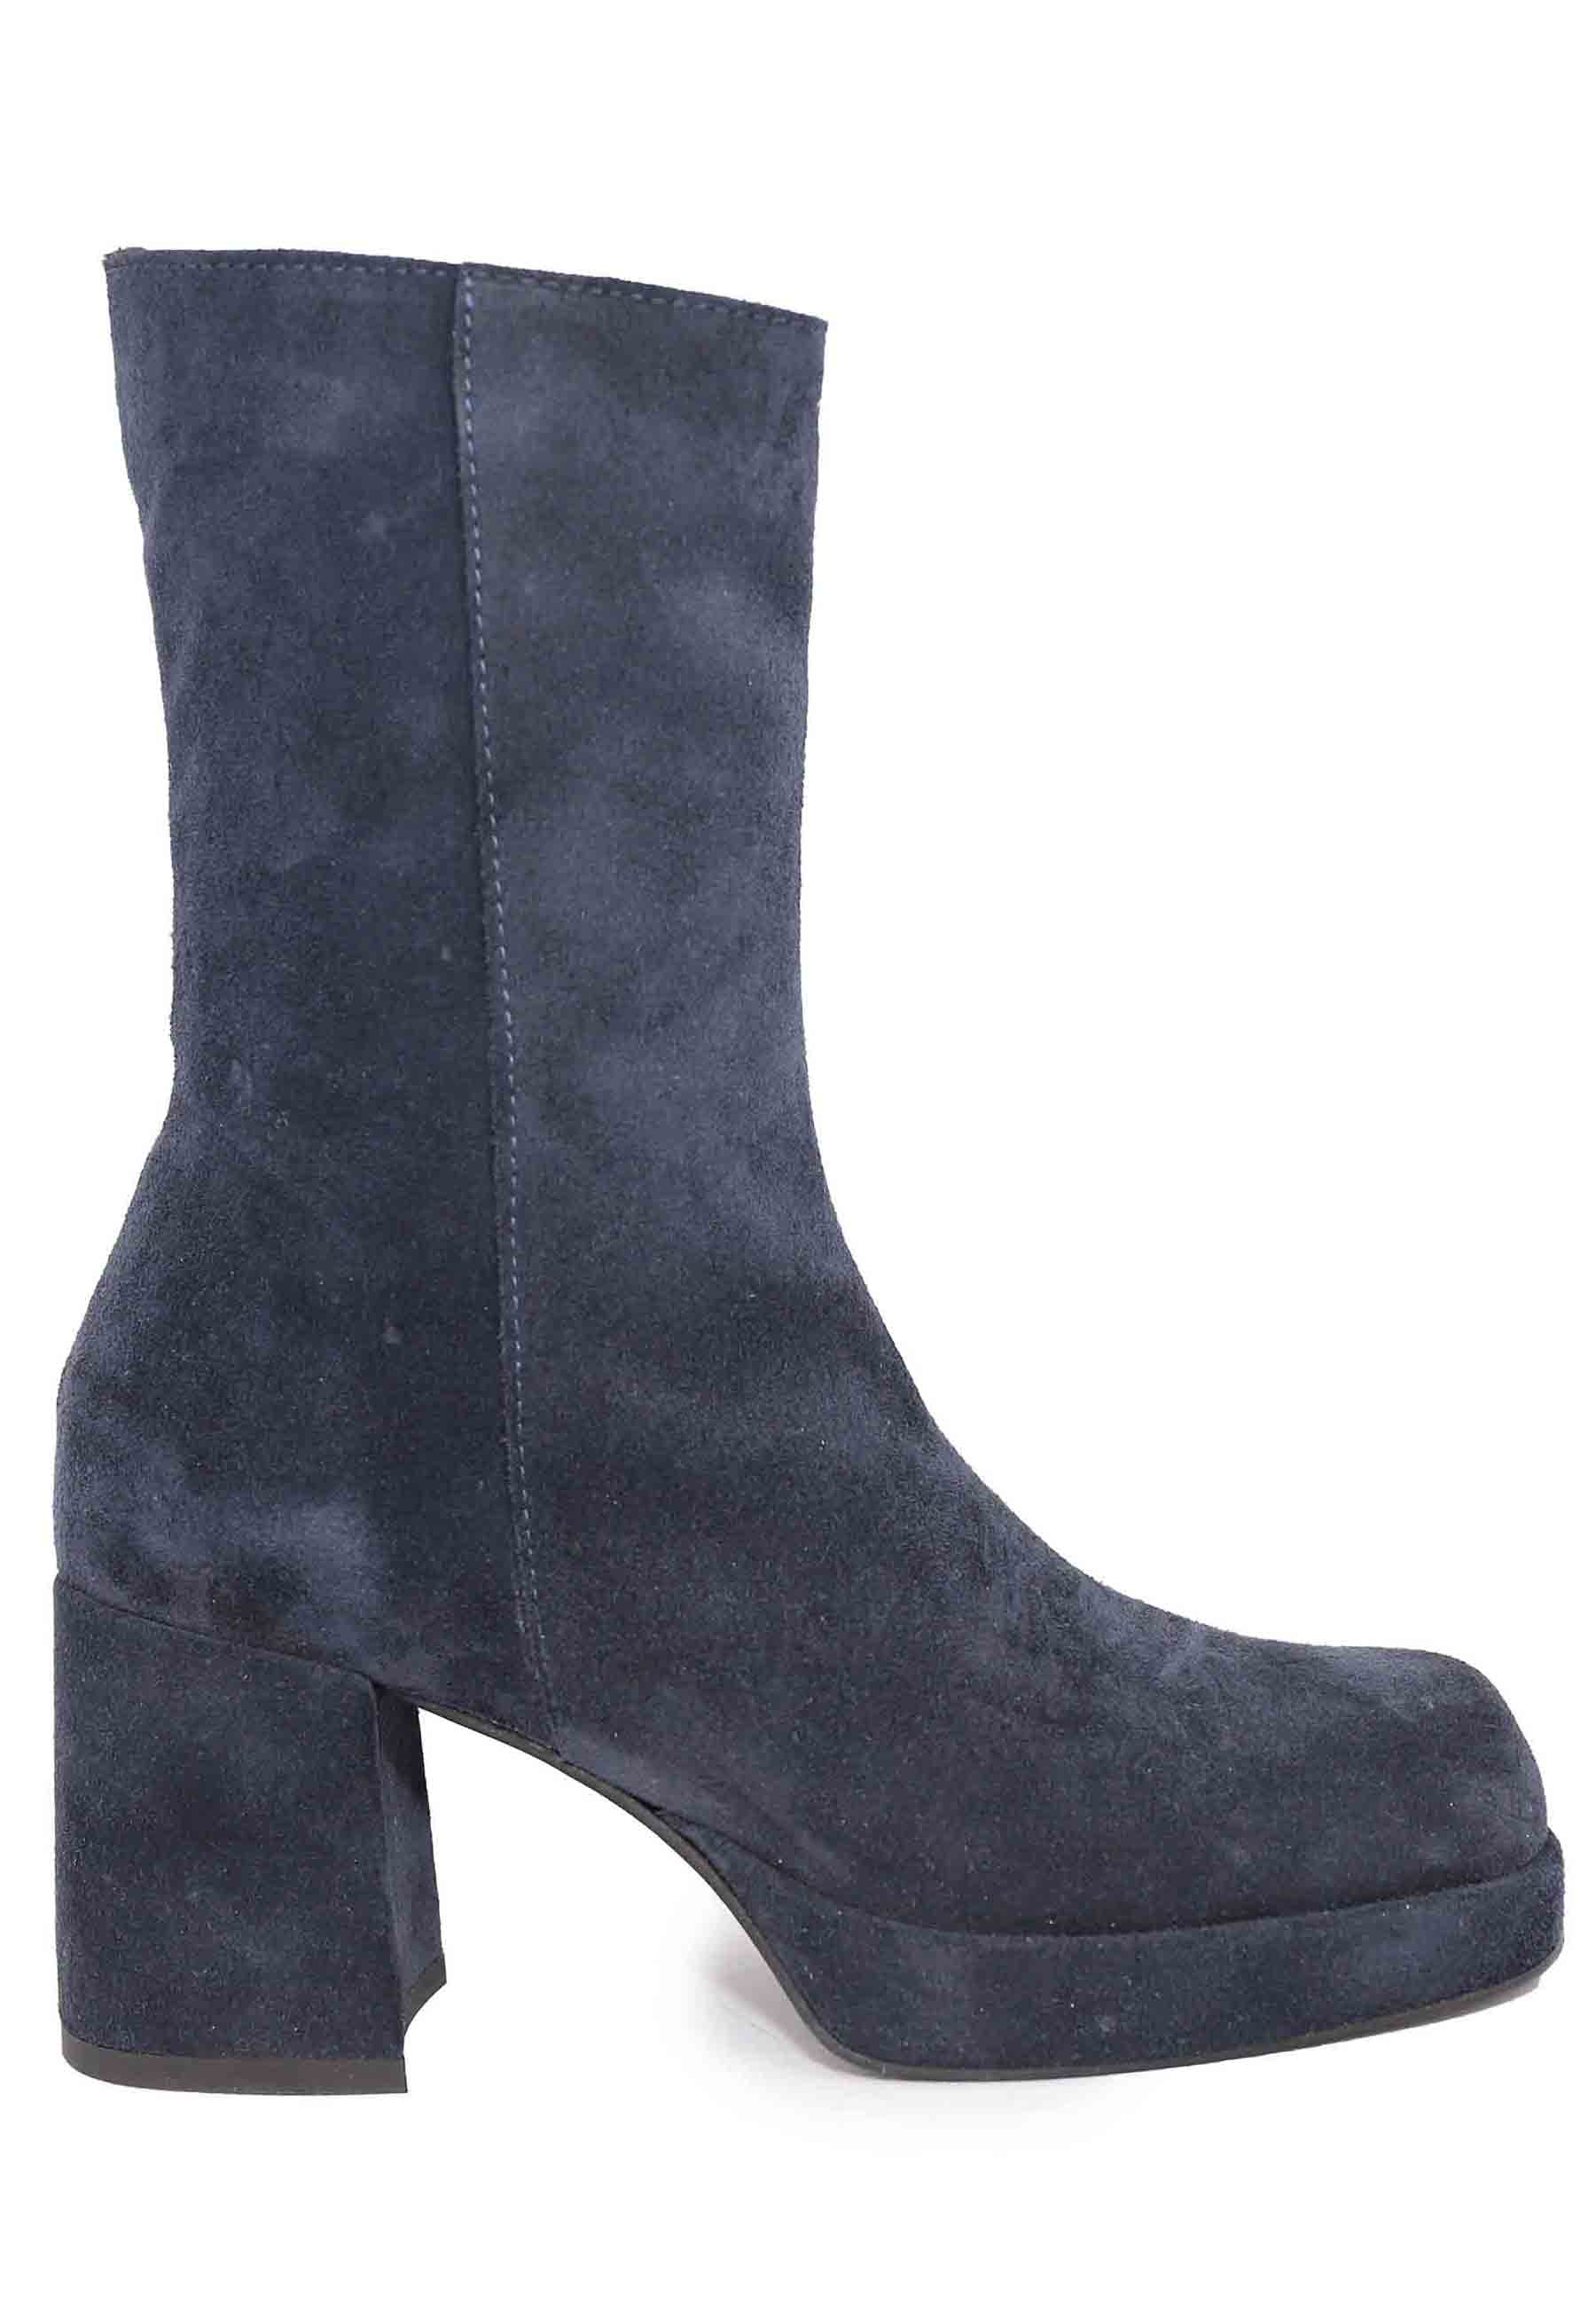 Women's ankle boots in blue suede with heel and platform